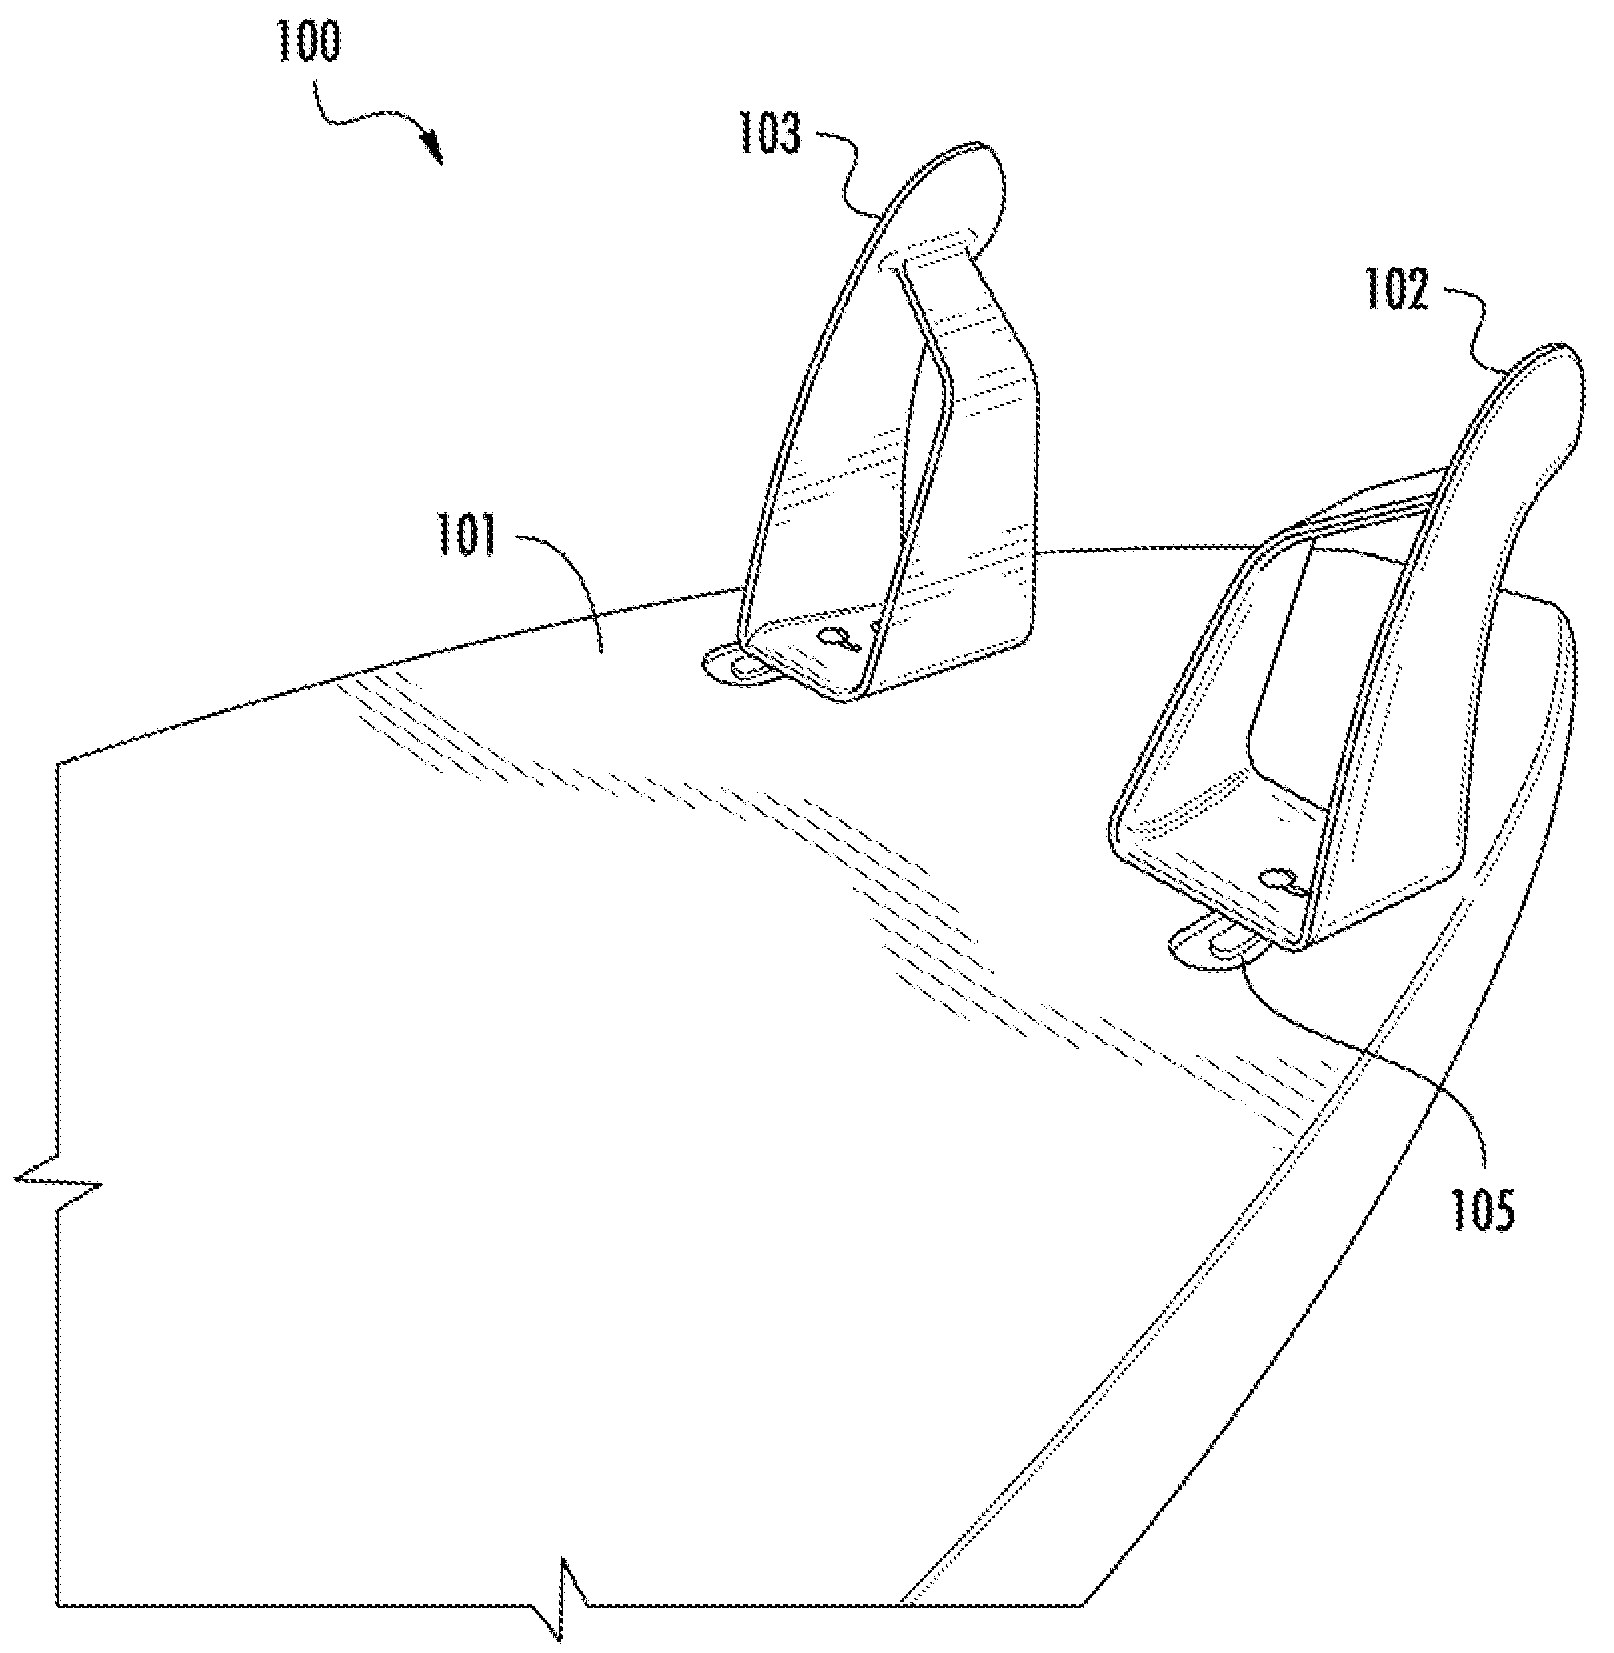 Surfboard fin for generating surfboard lift and method of use